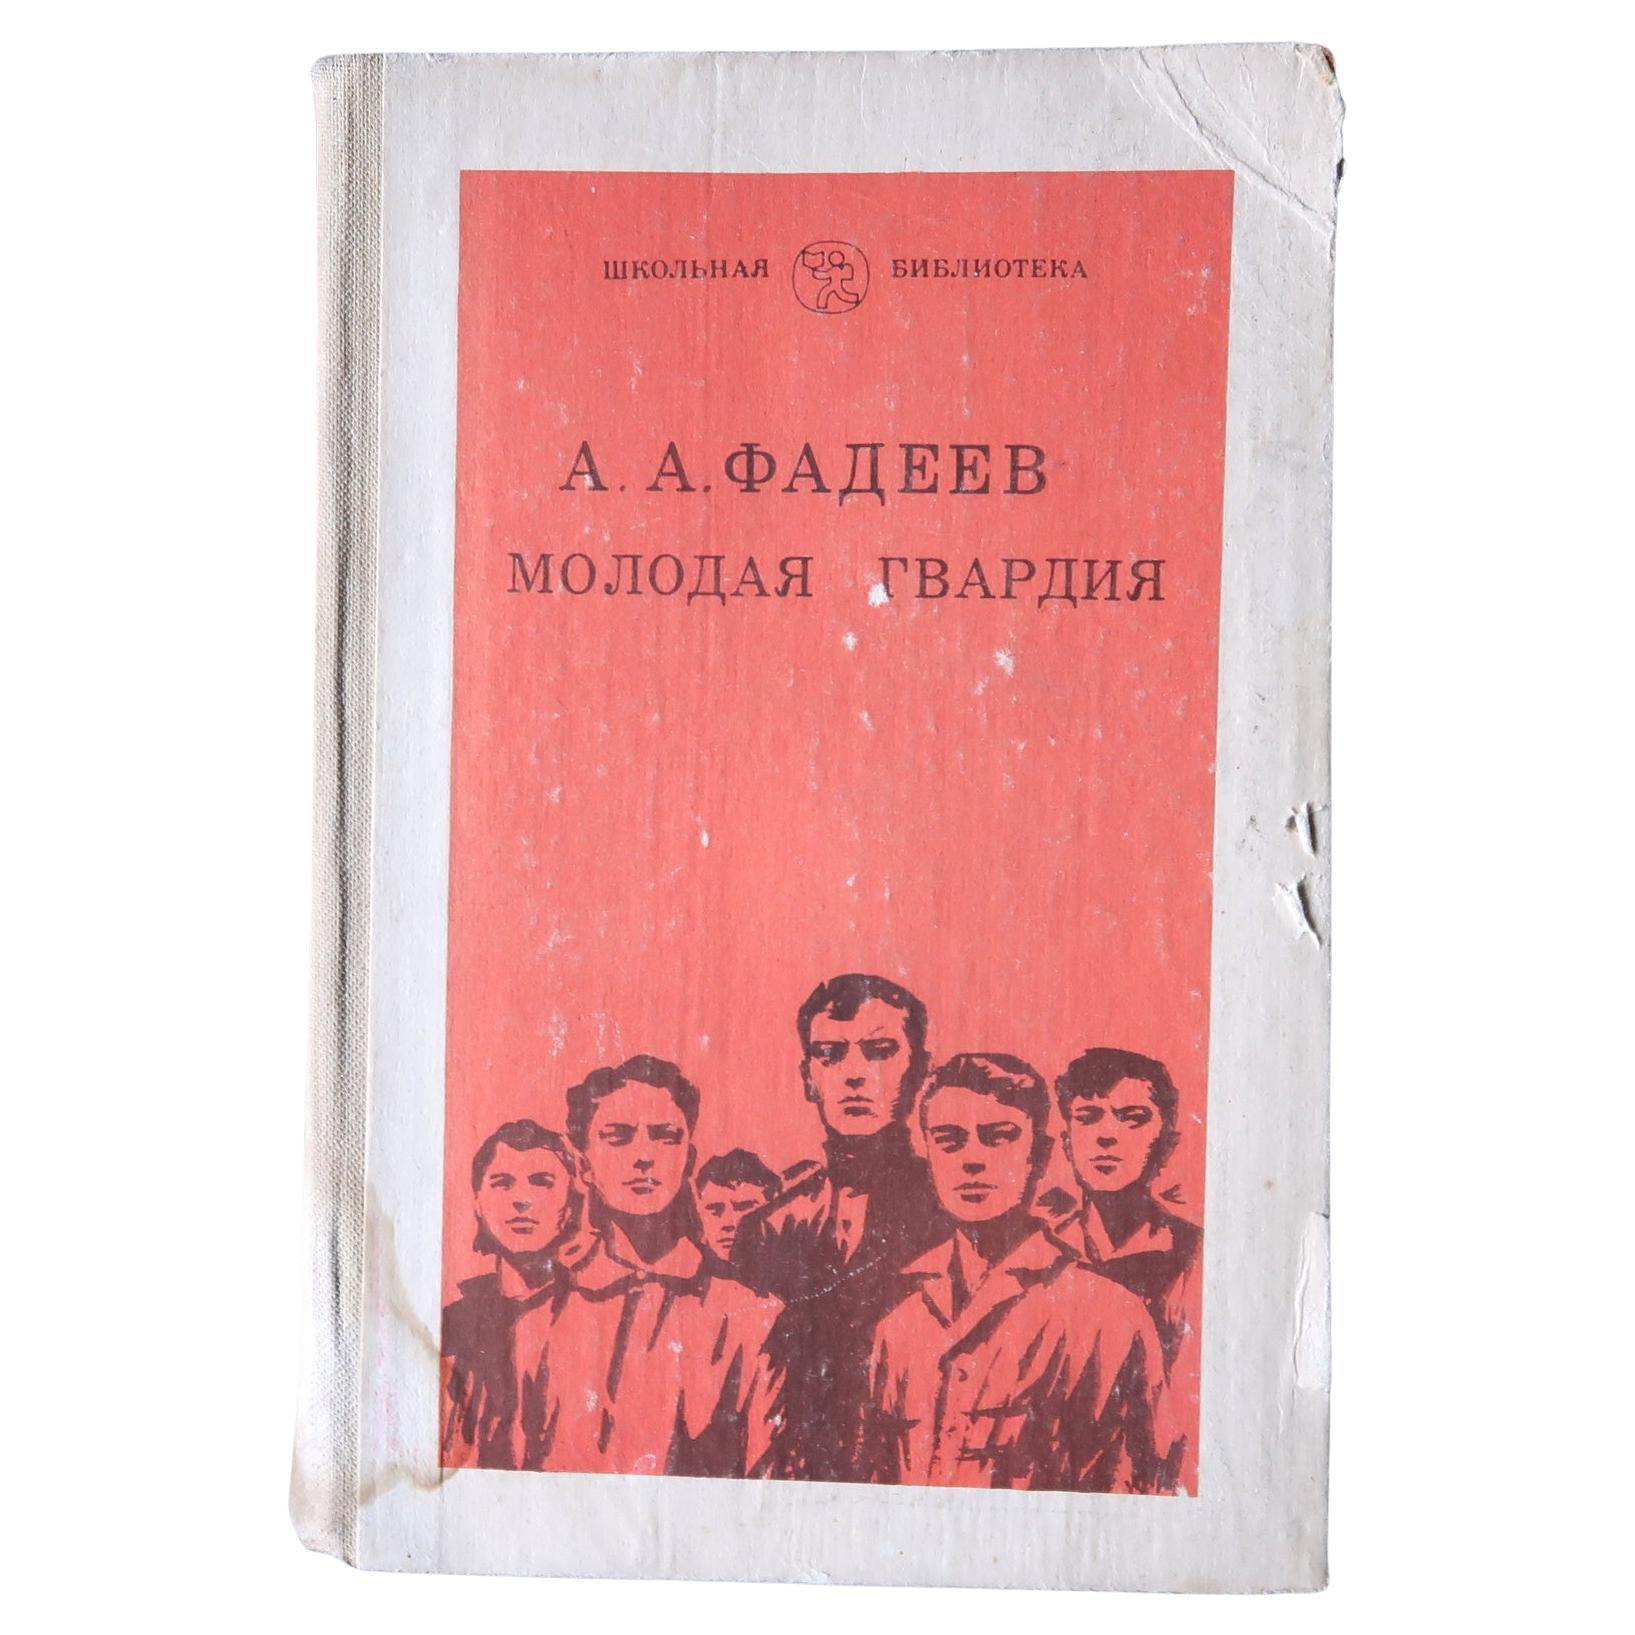 Vintage USSR Book: 'Young Guard' by A.A. Fadeev - A Patriotic Epic, 1J110 For Sale